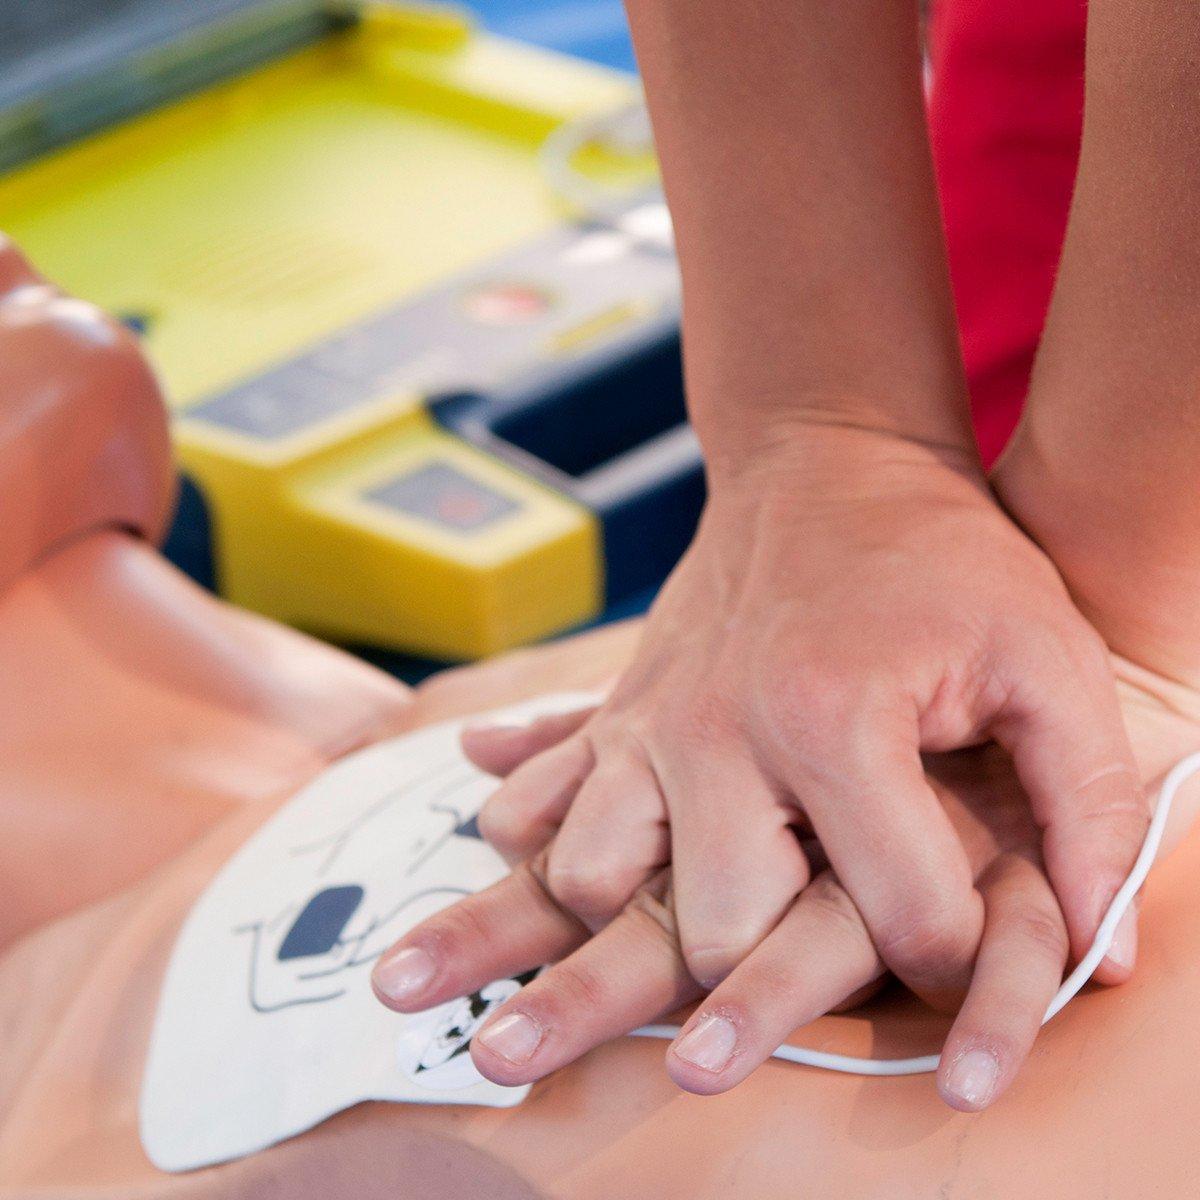 Emergency First Aid and CPR-C May 